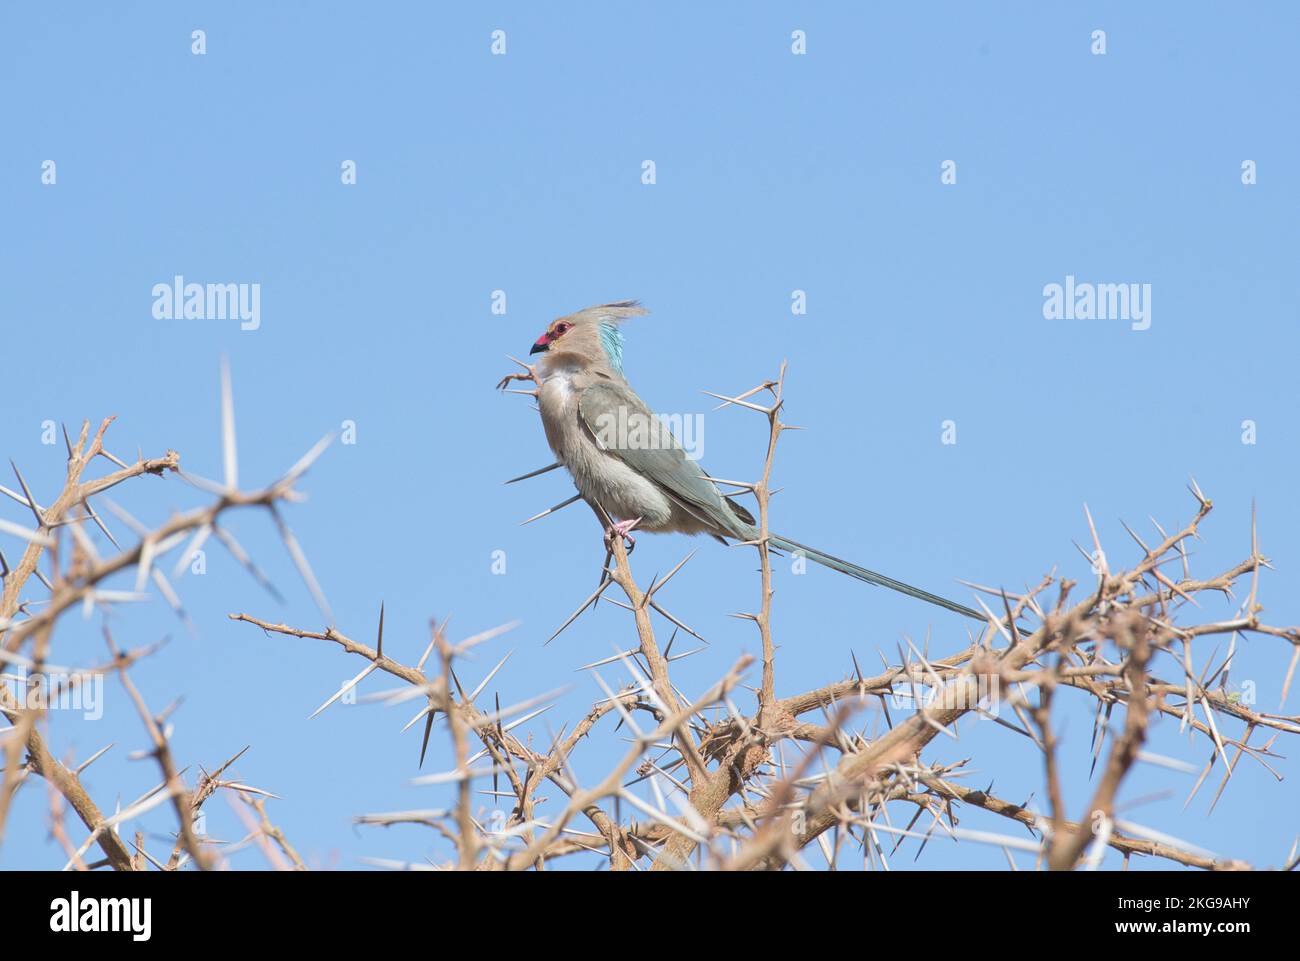 blue-naped mousebird (Urocolius macourus). The pale blue nape patch is visible in the photo. Stock Photo